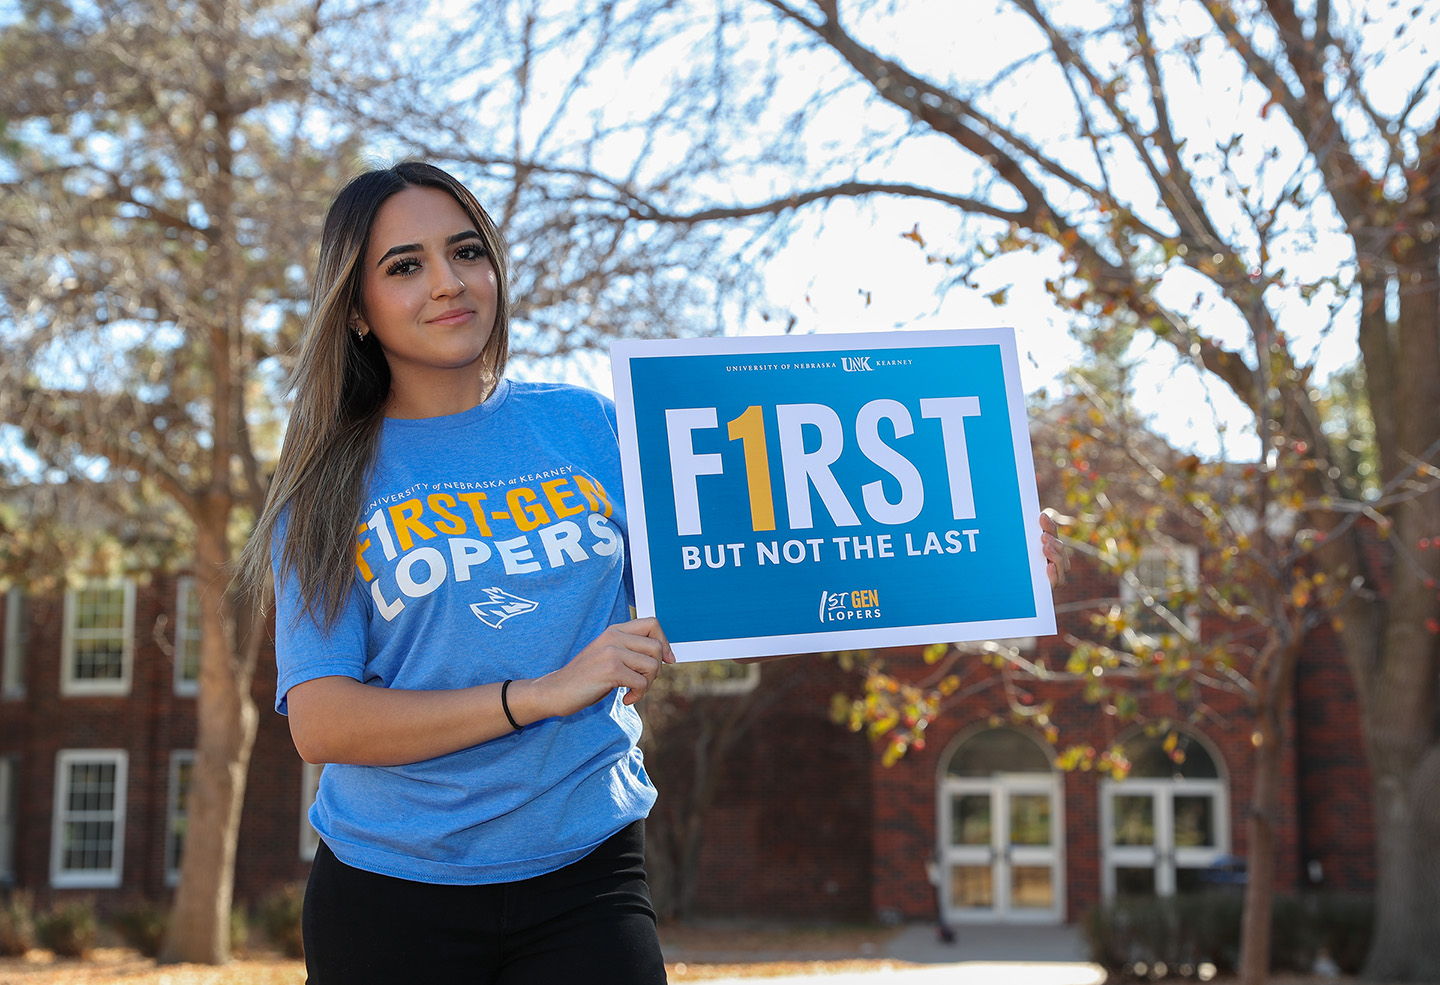 Brittany Chavez is a sophomore at UNK, where she’s studying business administration with a minor in marketing and management. She’s also president of First-Gen Lopers, a campus organization that supports first-generation students. (Photos by Erika Pritchard, UNK Communications)